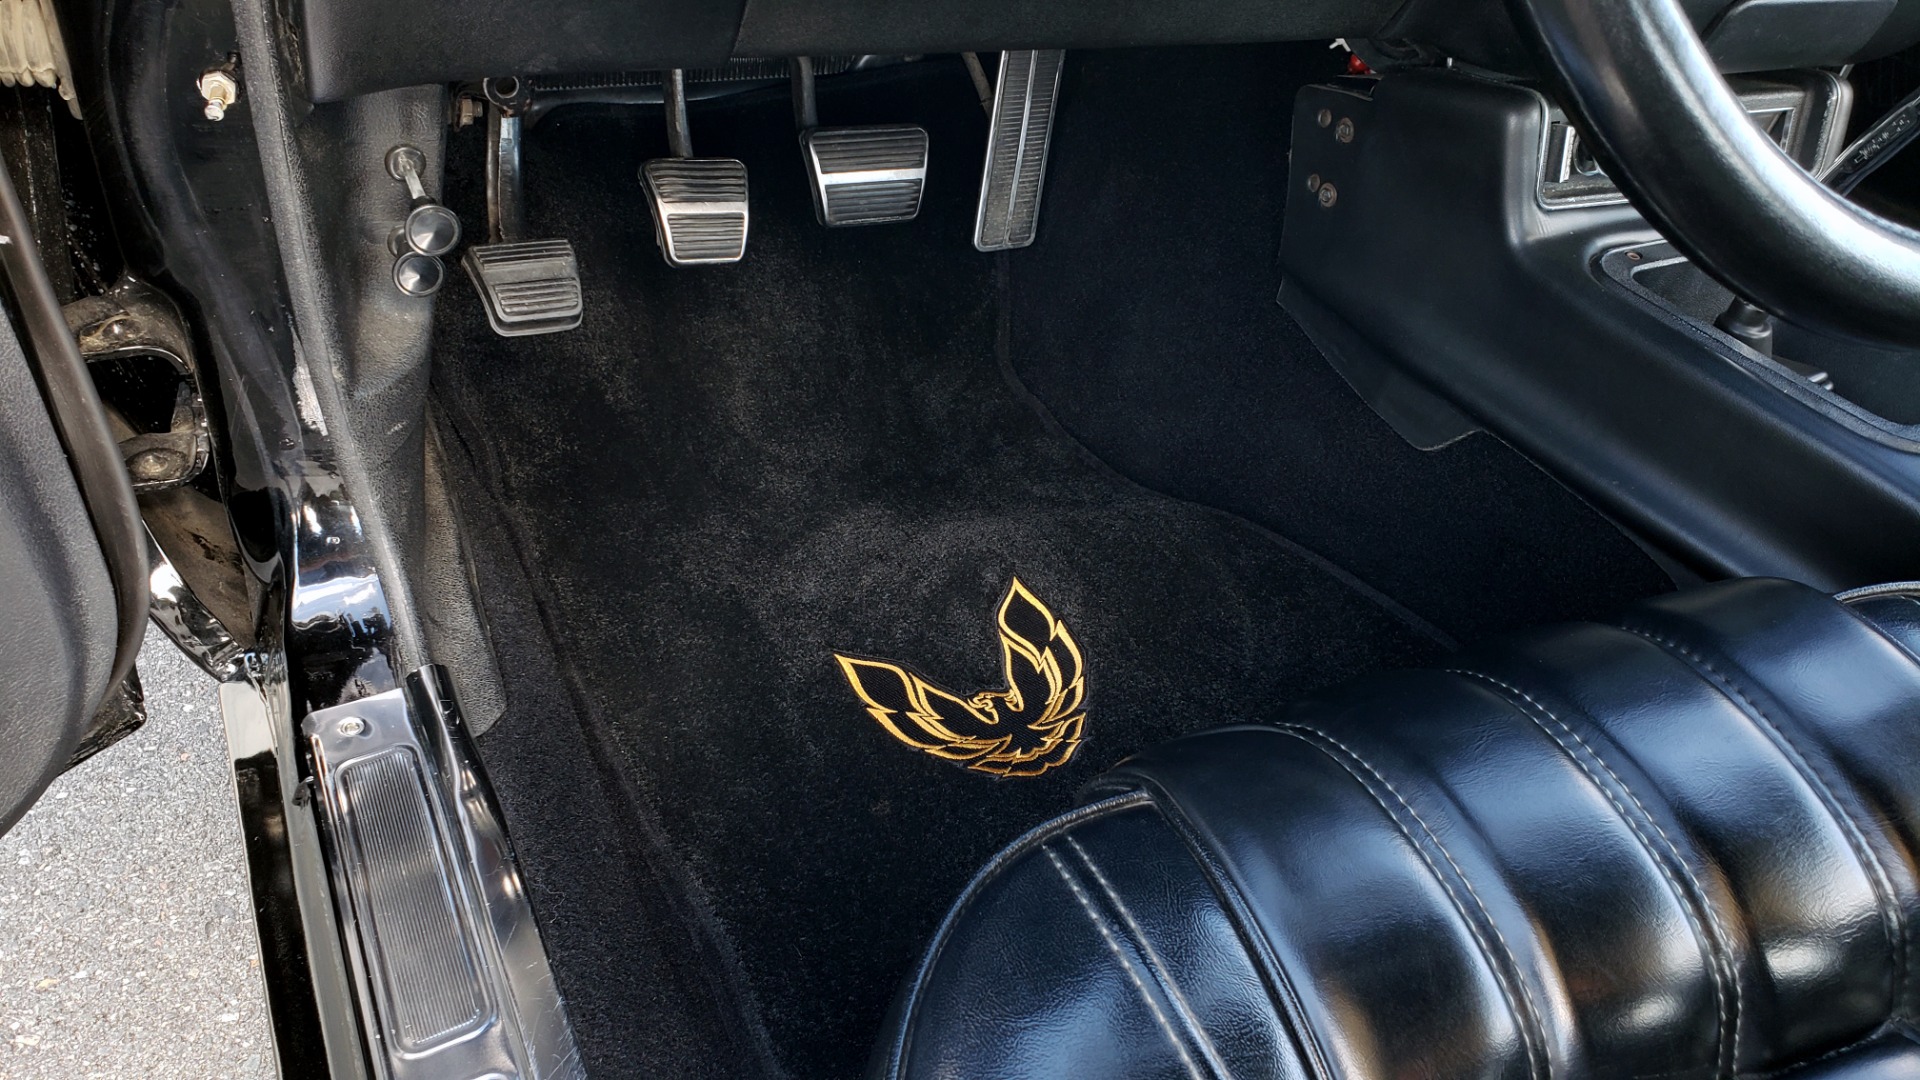 Used 1977 Pontiac TRANS AM Y82 SPECIAL EDITION BANDIT / 6.6L / 4-SPEED MANUAL / LOW MILES for sale Sold at Formula Imports in Charlotte NC 28227 51